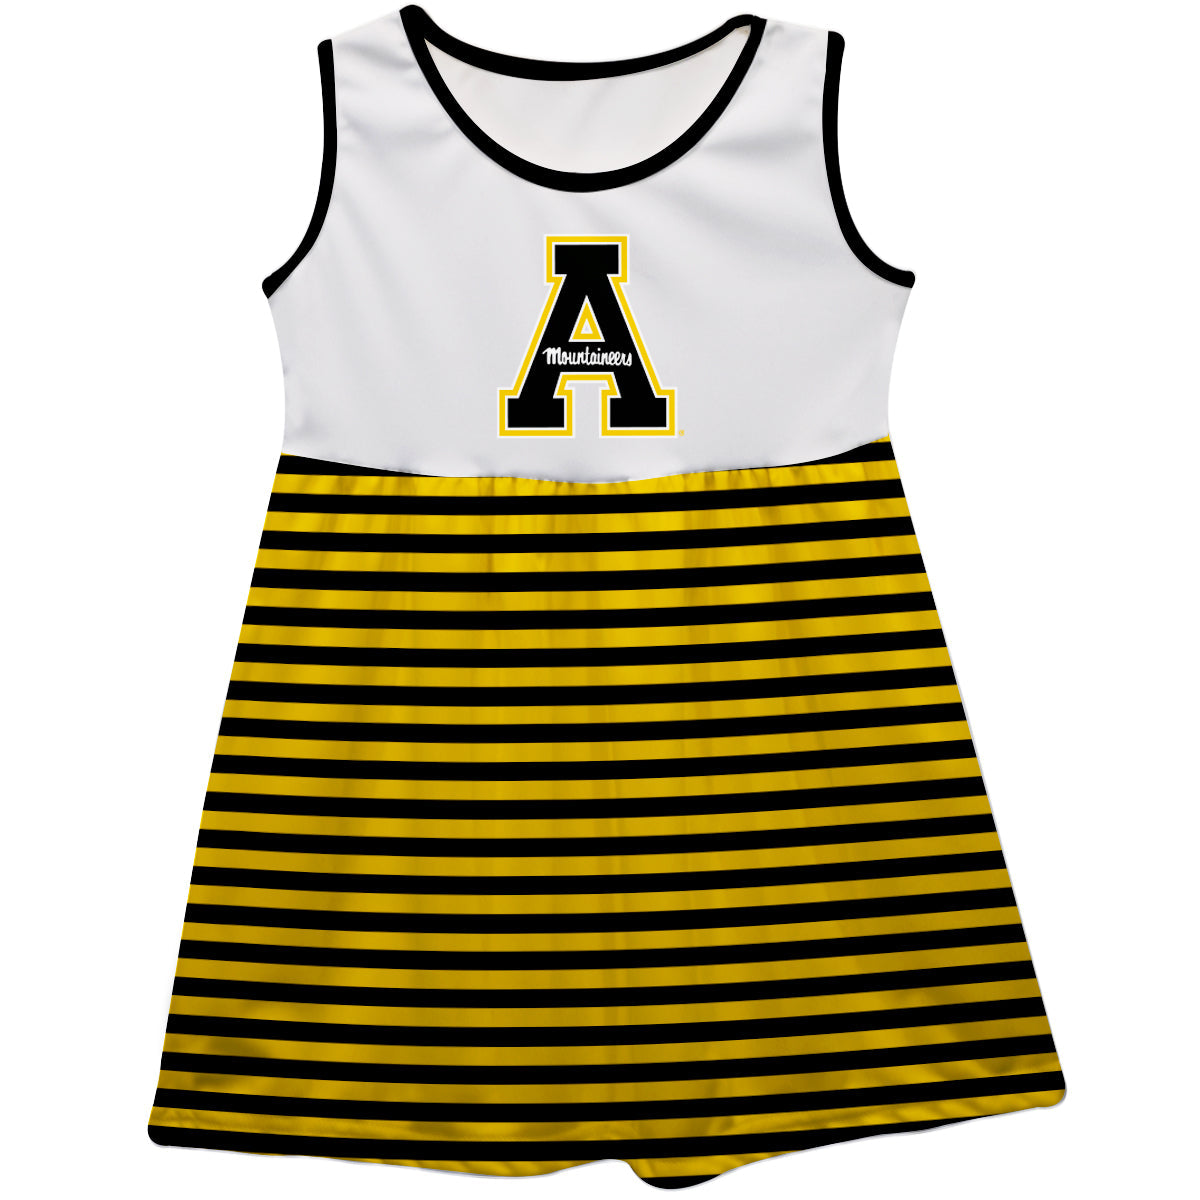 Appalachian State Mountaineers White Sleeveless Tank Dress With Gold Stripes by Vive La Fete-Campus-Wardrobe